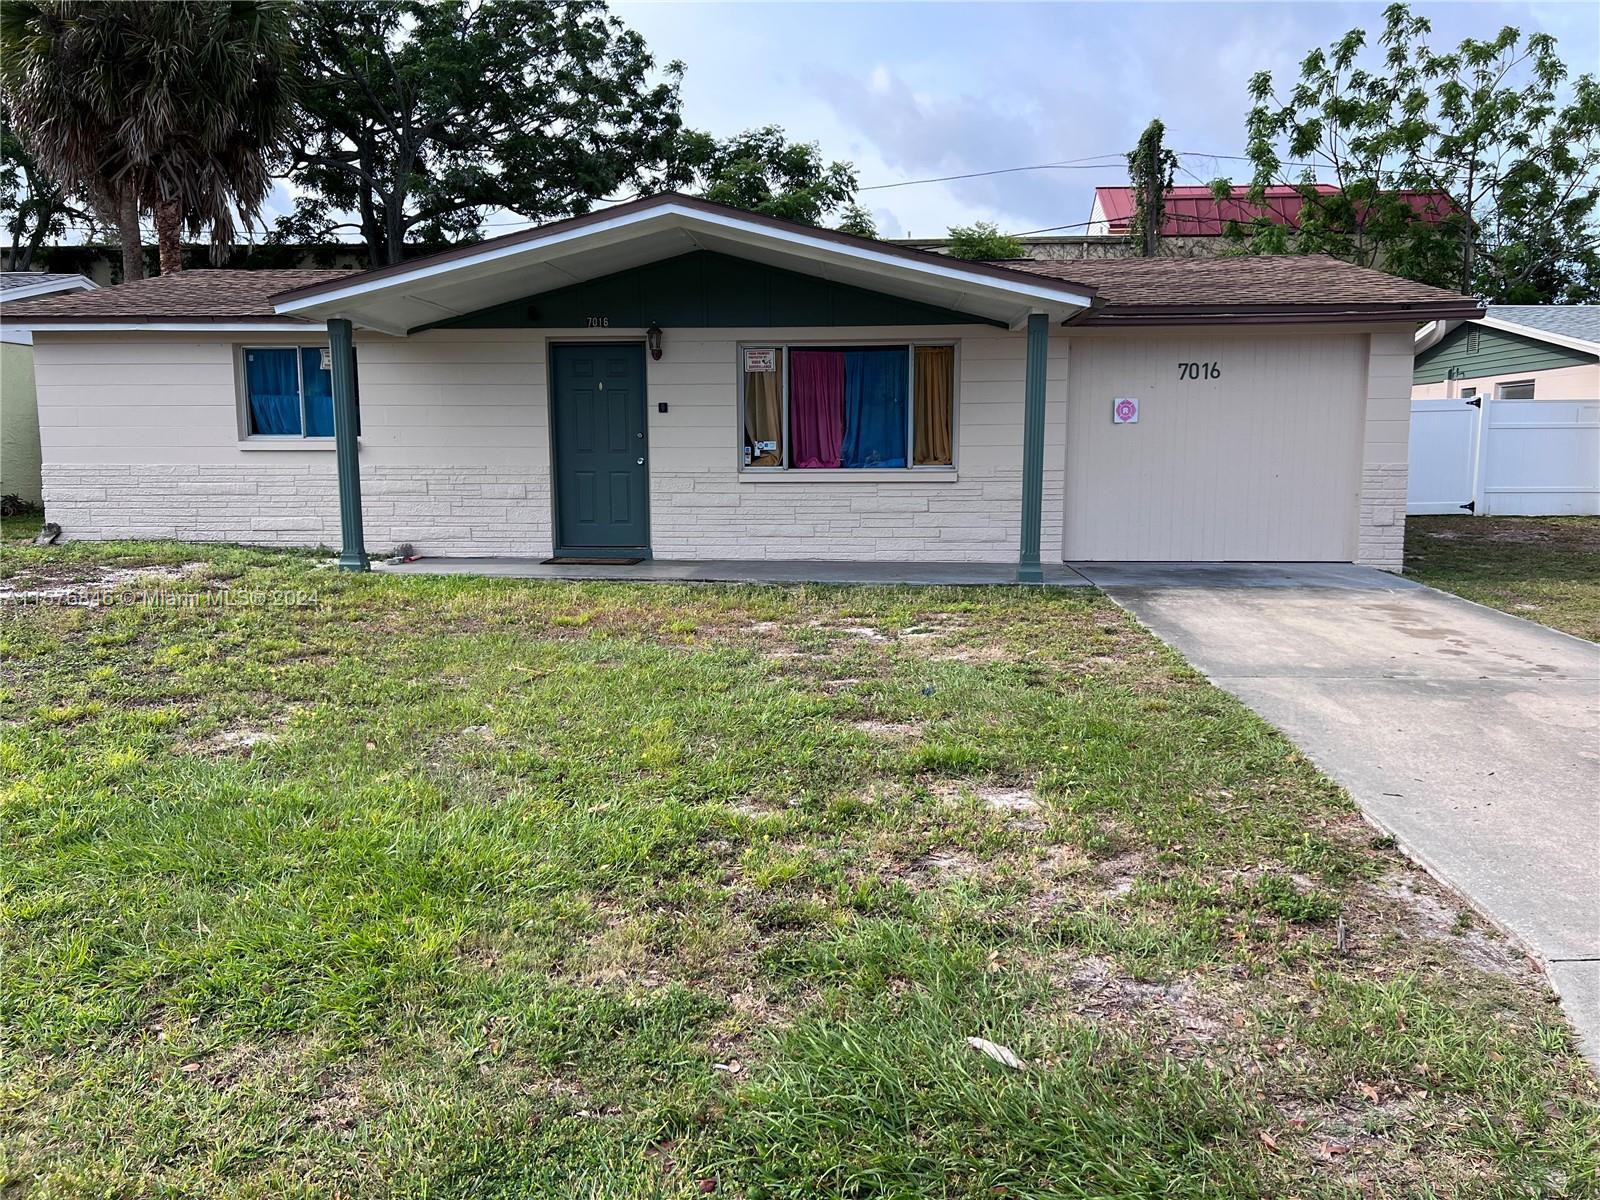 Photo of 7016 Palisade in New Port Richey, FL